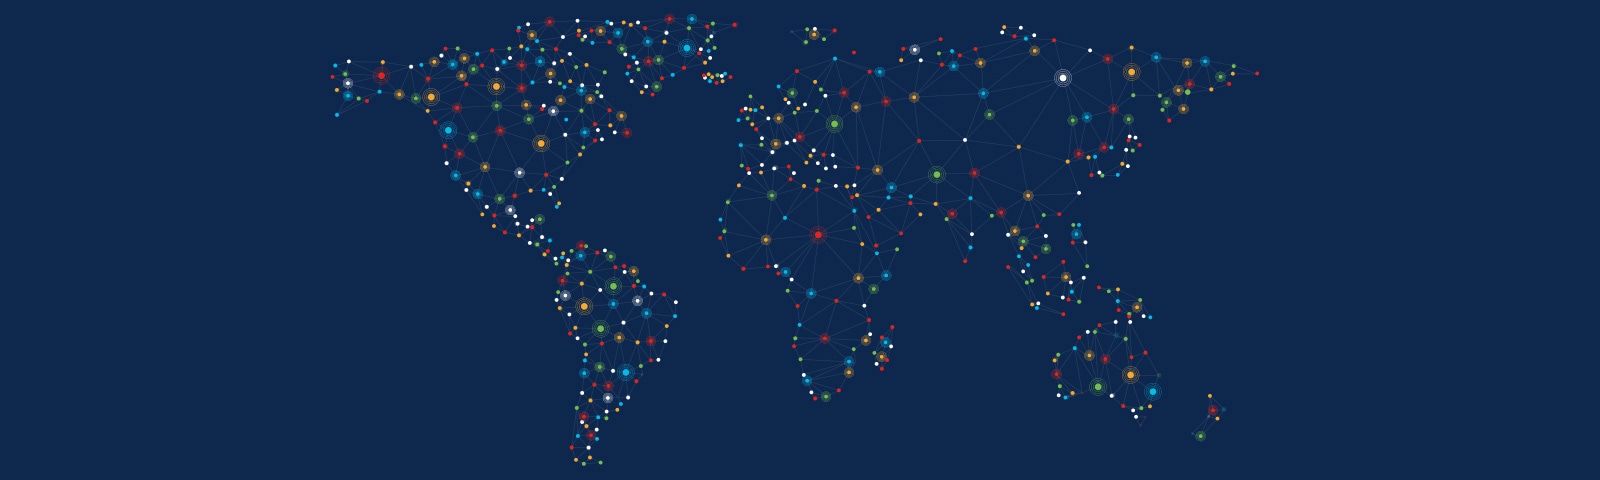 Image of world map, with colored dots illustrating digital connection